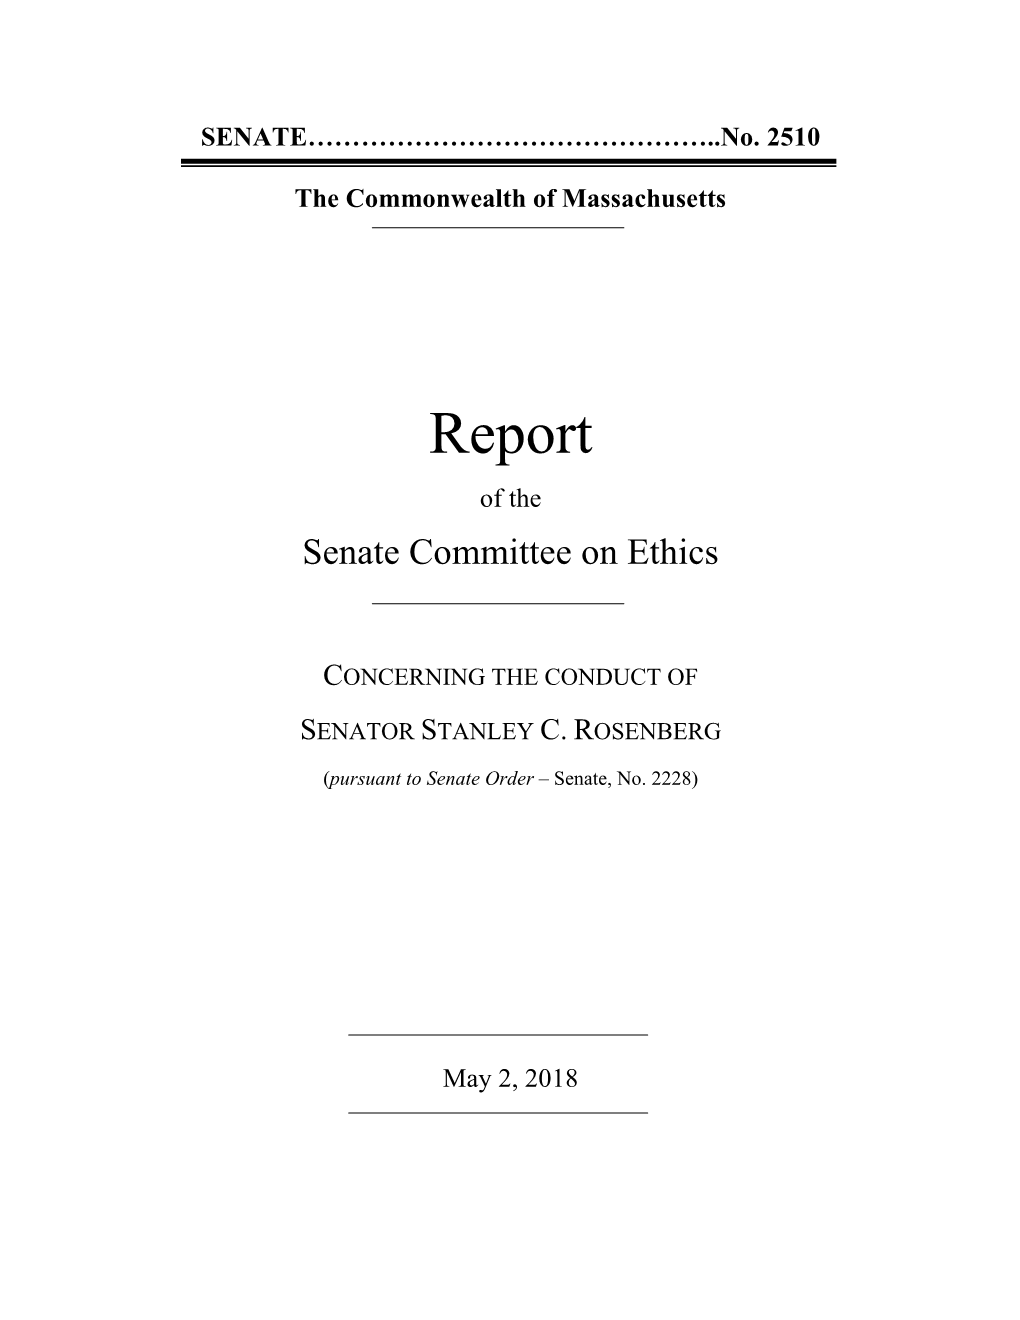 Report of the Senate Committee on Ethics